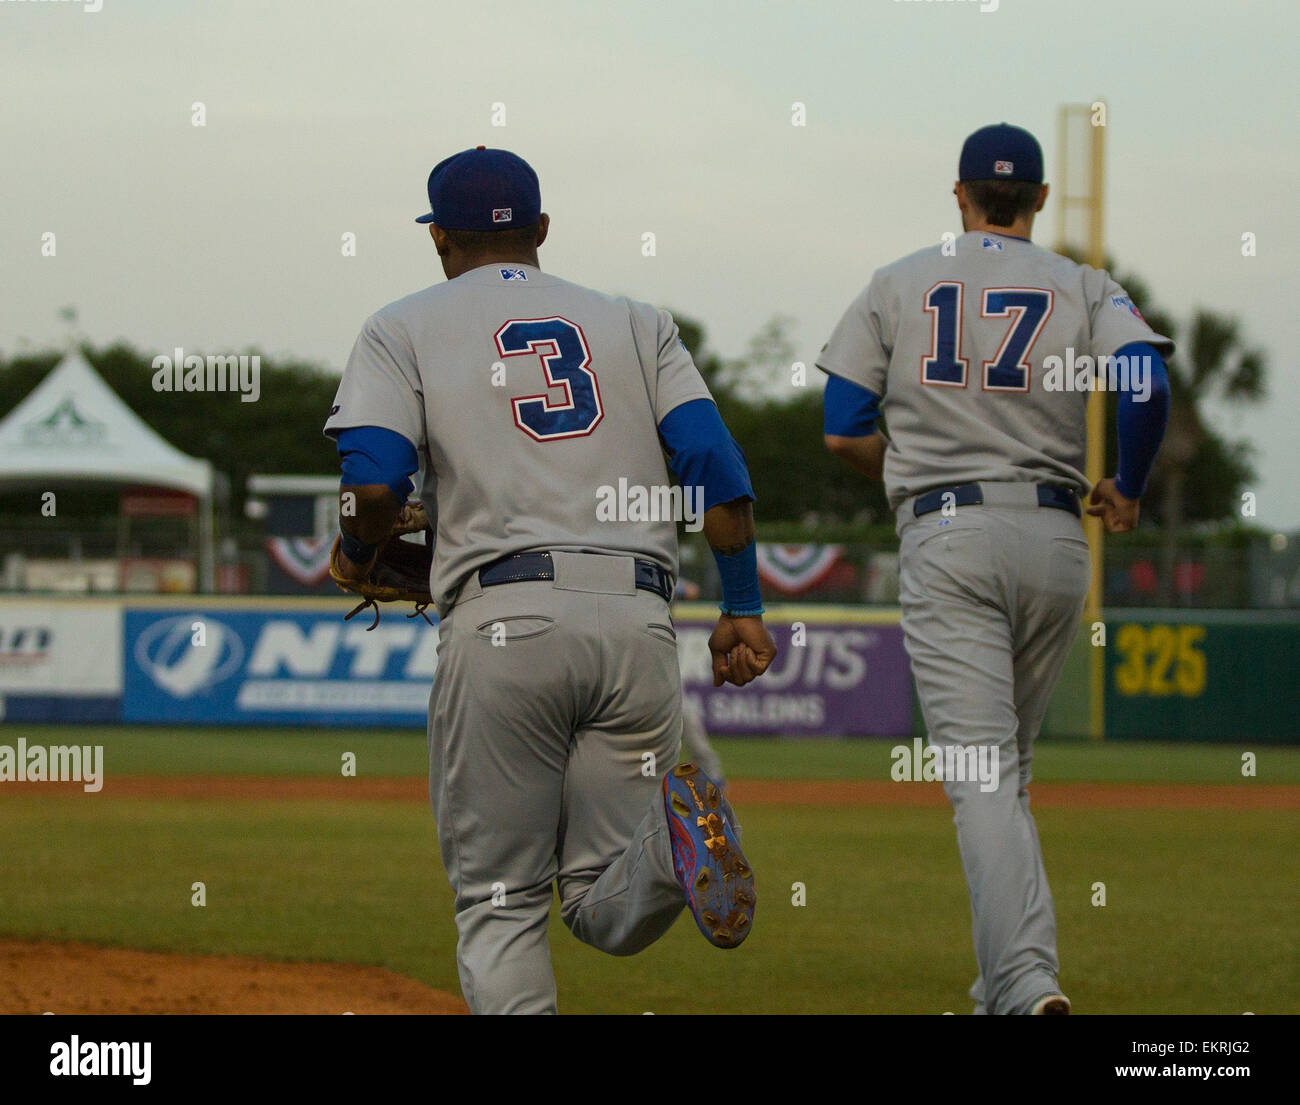 New Orleans, LA, USA. 13th Apr, 2015. Iowa Cubs shortstop Addison Russell (3) and third baseman Kris Bryant (17) take the field during the game between Iowa Cubs and New Orleans Zephyrs at Zephyr Field in New Orleans, LA. Credit:  csm/Alamy Live News Stock Photo